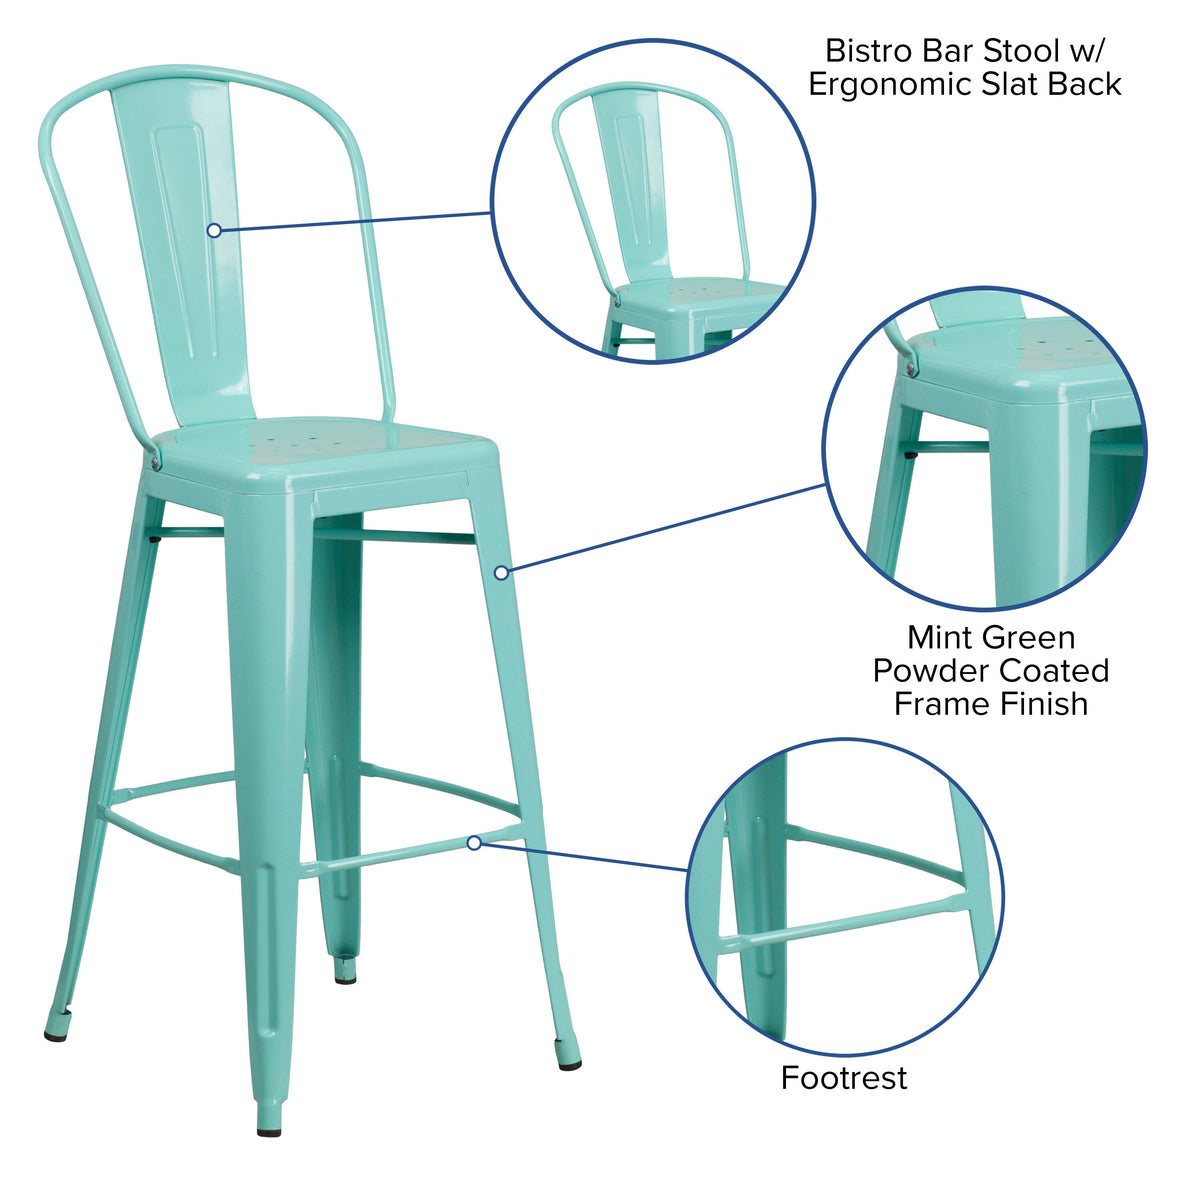 Mint Green |#| 30inch High Mint Green Metal Indoor-Outdoor Barstool with Back